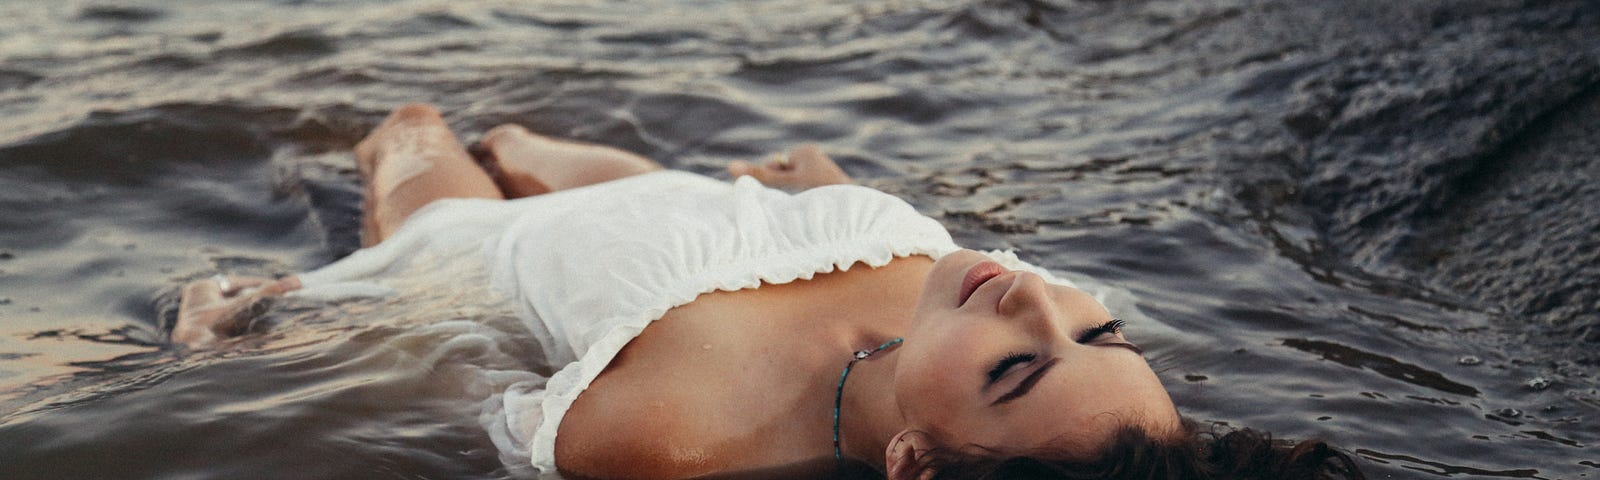 Glamorous woman in a white off the shoulder dress lying in beach water face up.